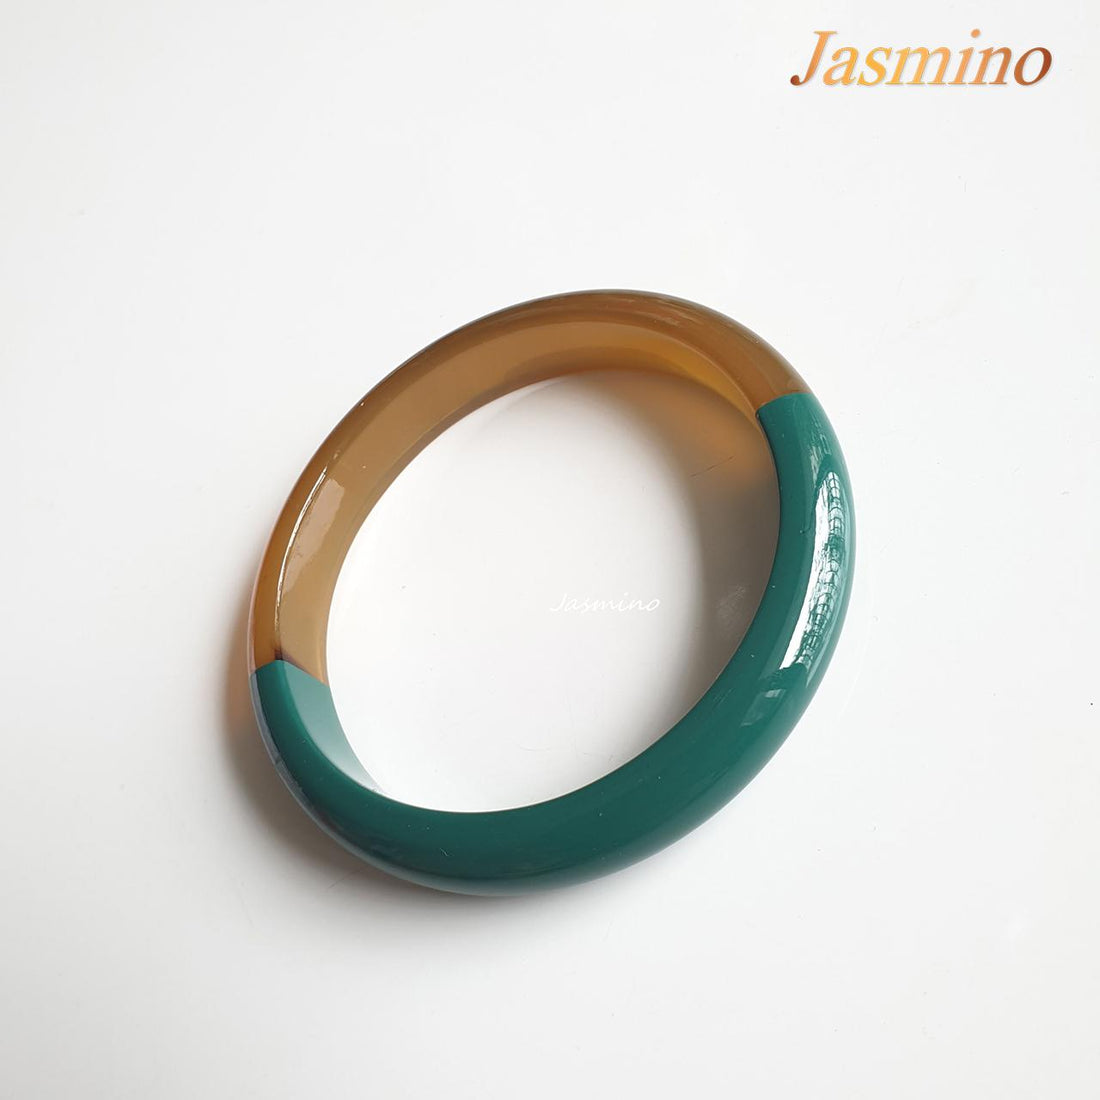 bracelet is designed with half natural horn and half green lacquer, unique Christmas gift for her